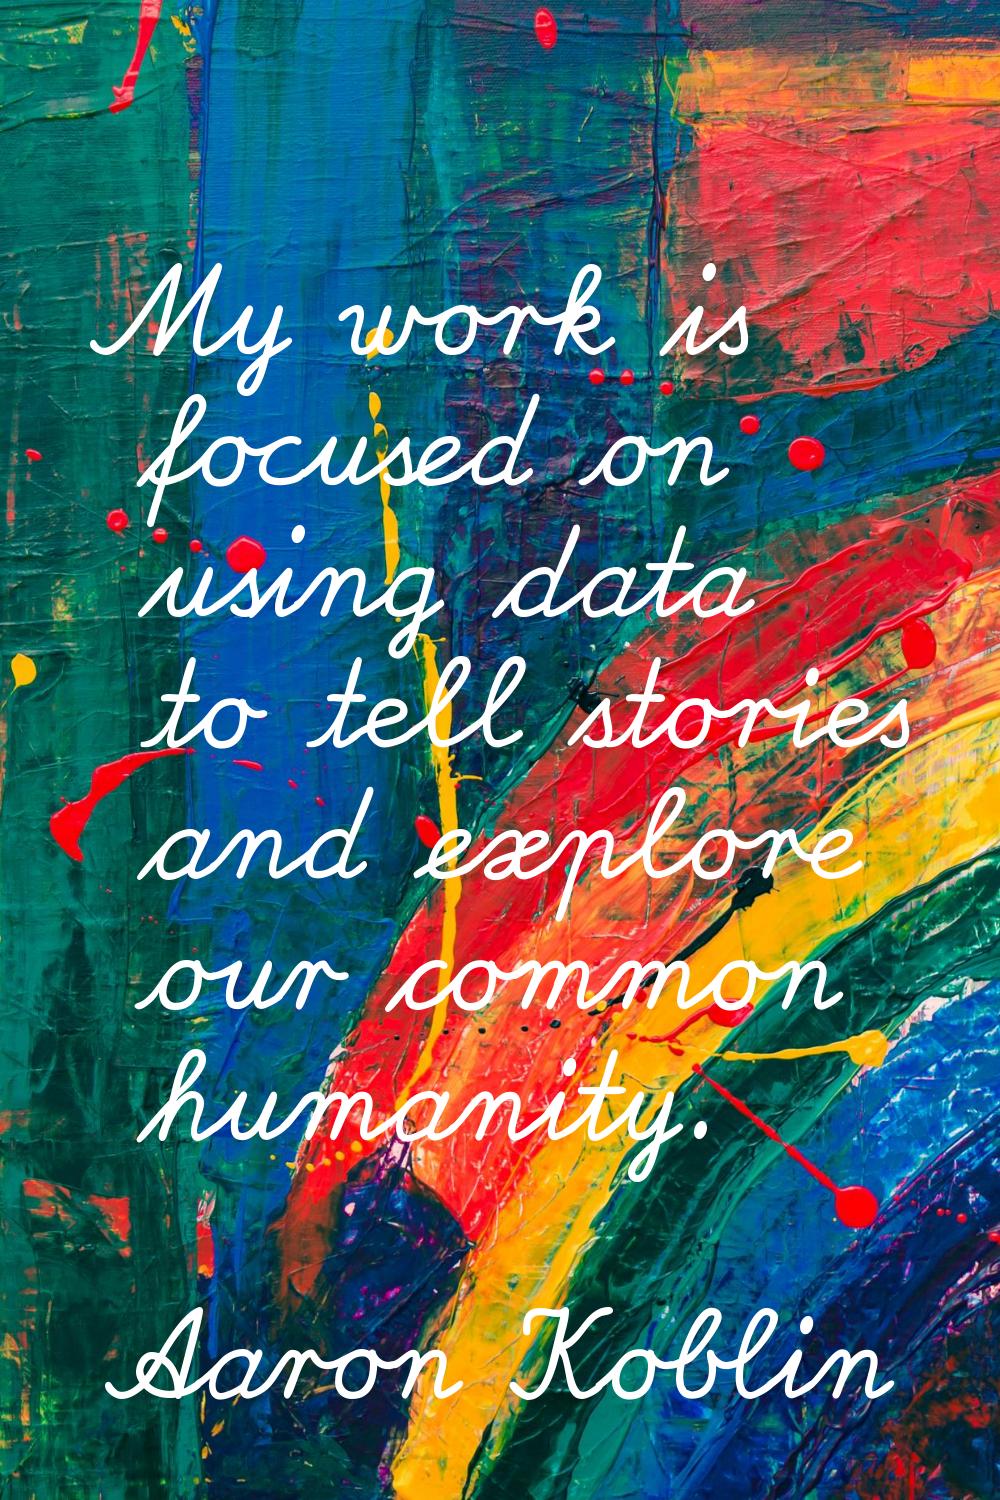 My work is focused on using data to tell stories and explore our common humanity.